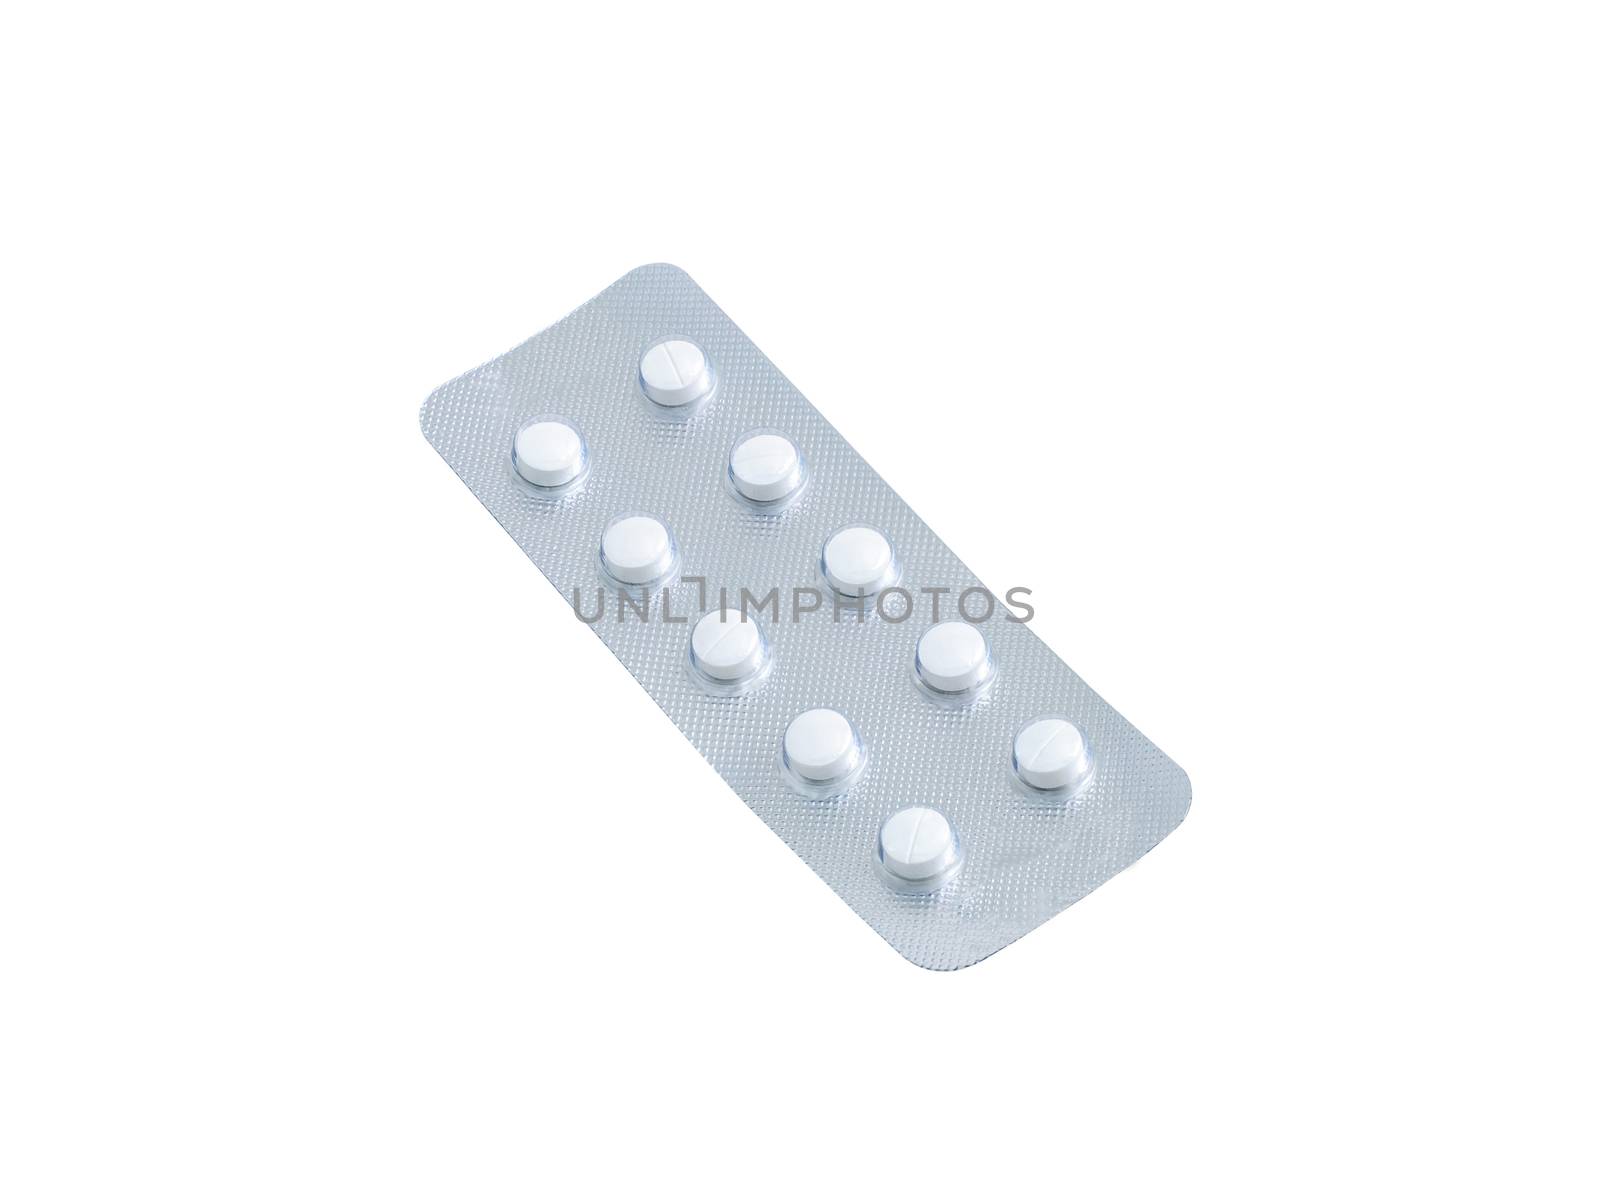 Packs of pills isolated on white background 